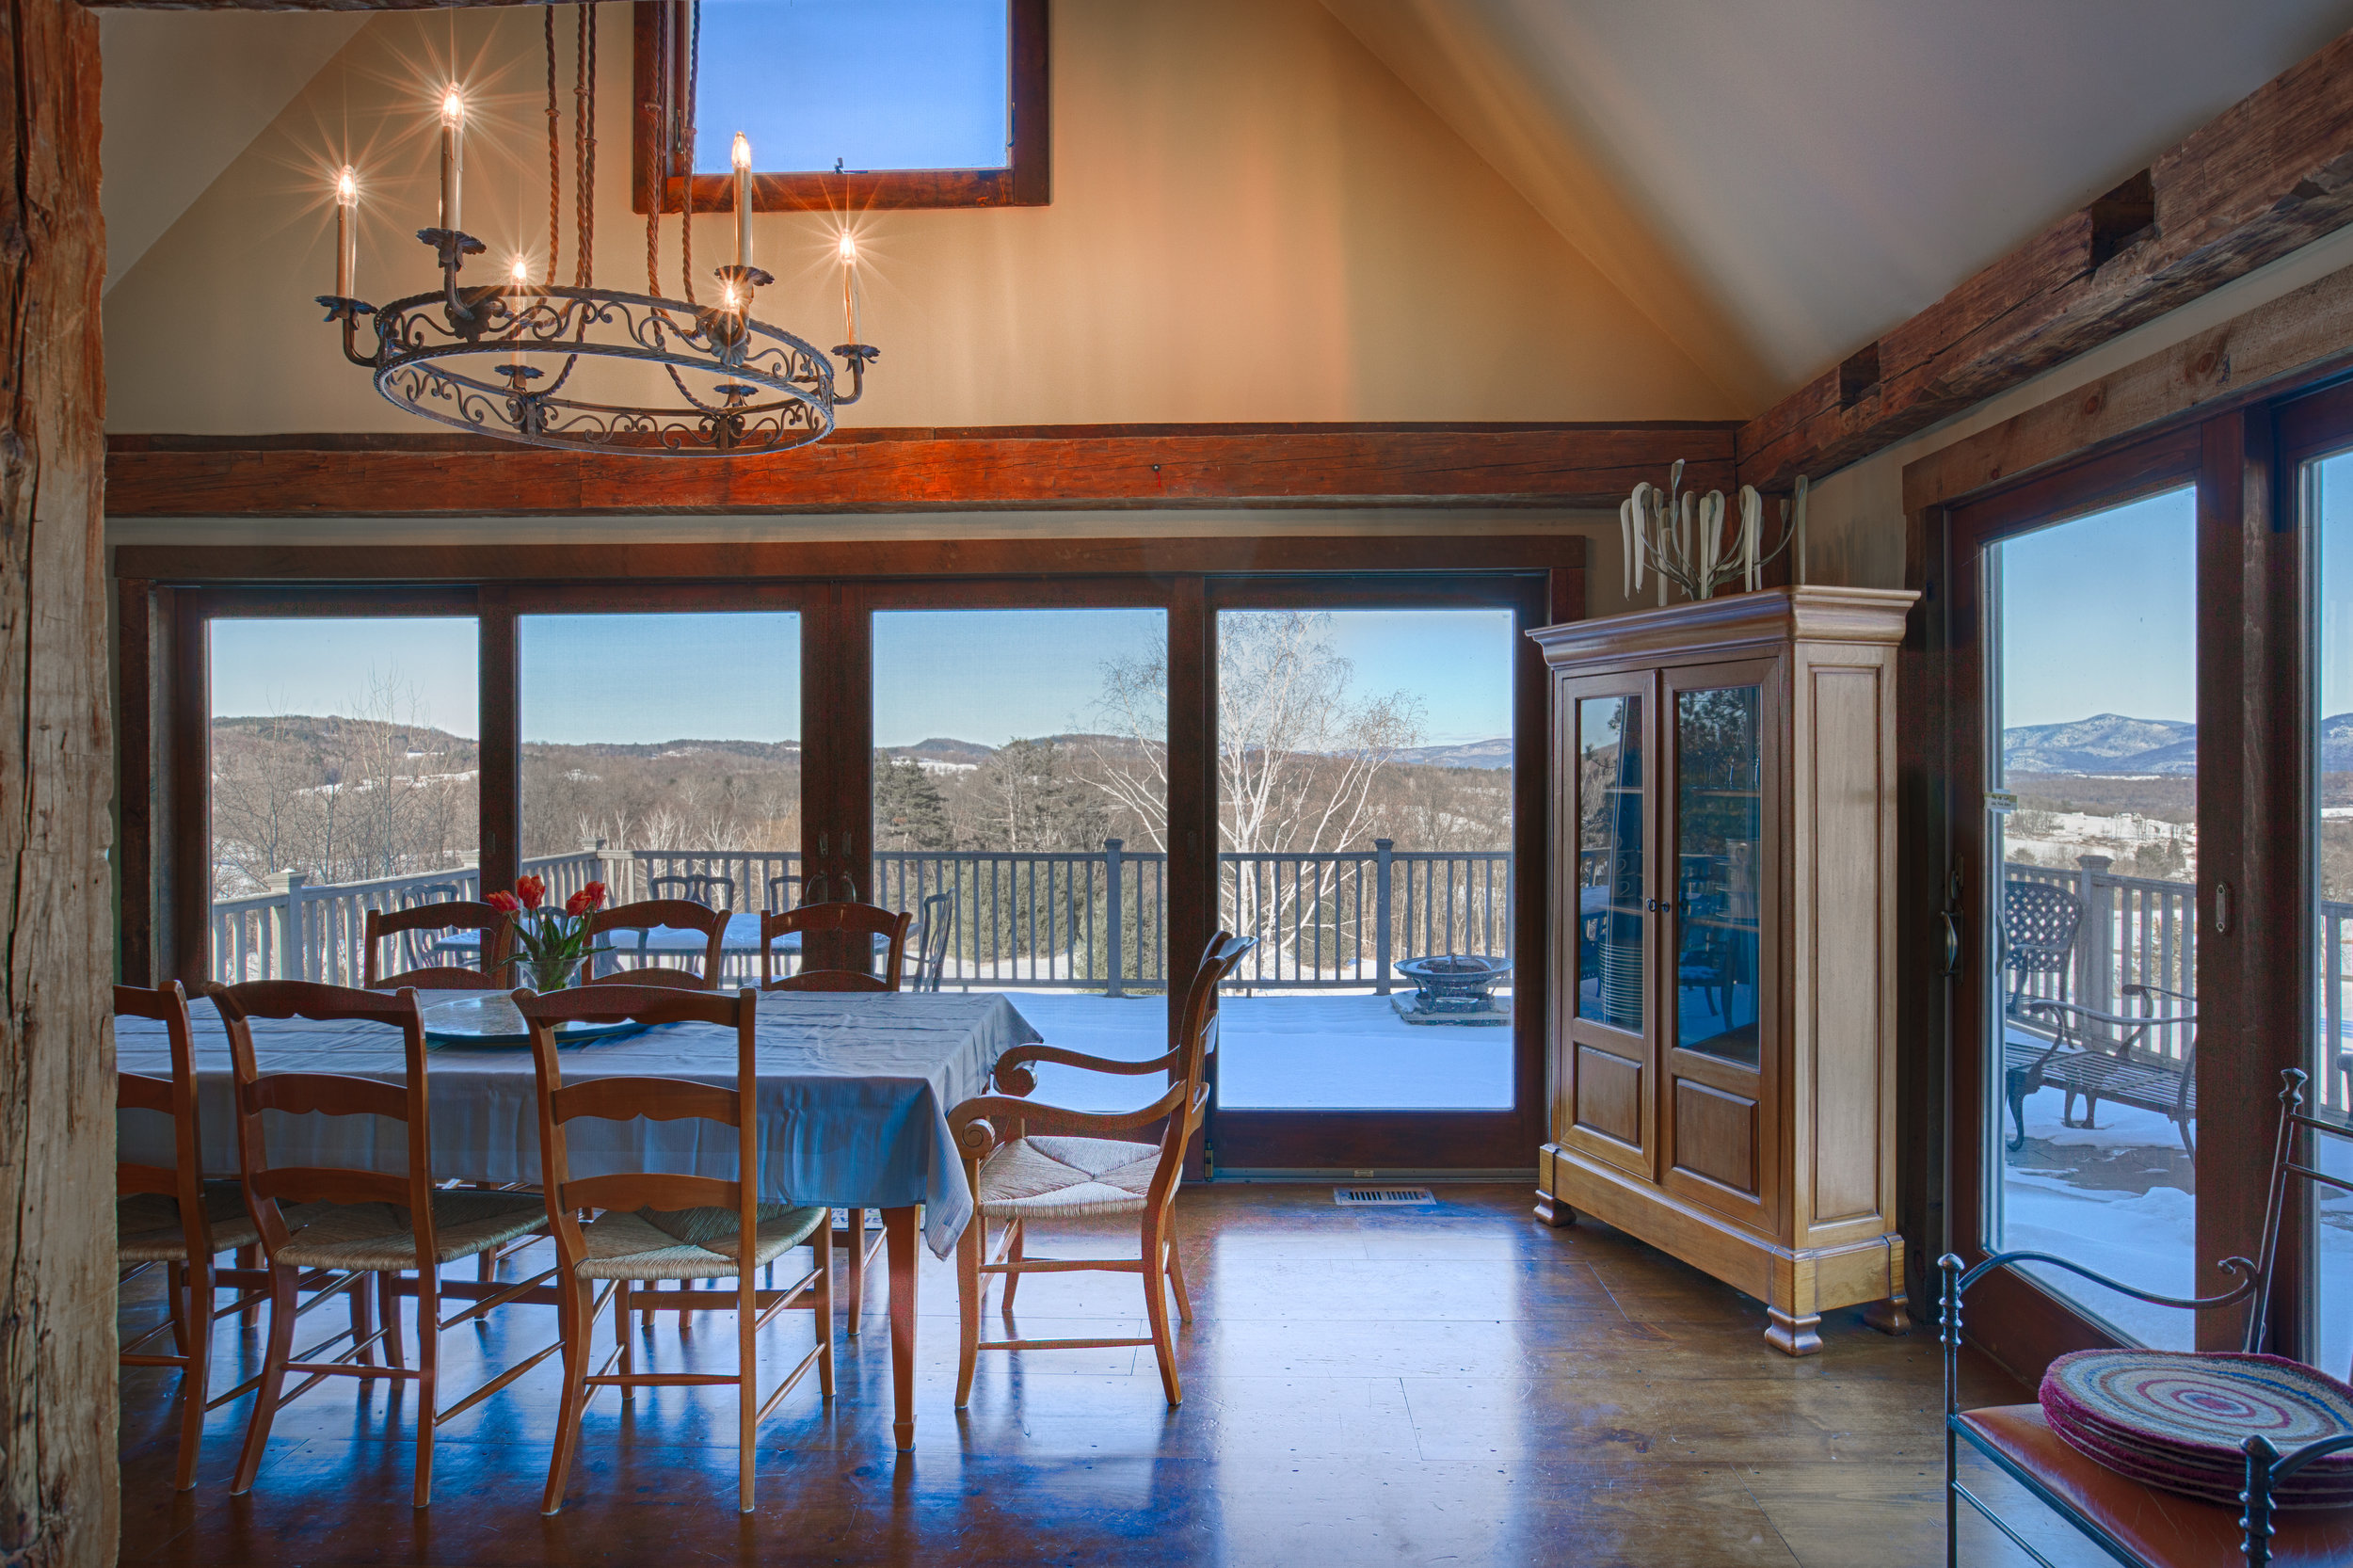  Wide open view looking into dining room. Dining room walls are lined with floor to ceiling windows that overlook a deck with a Mountain View.  There is a table in the center of the dining room with multiple chairs and an armour tucked in the corner 